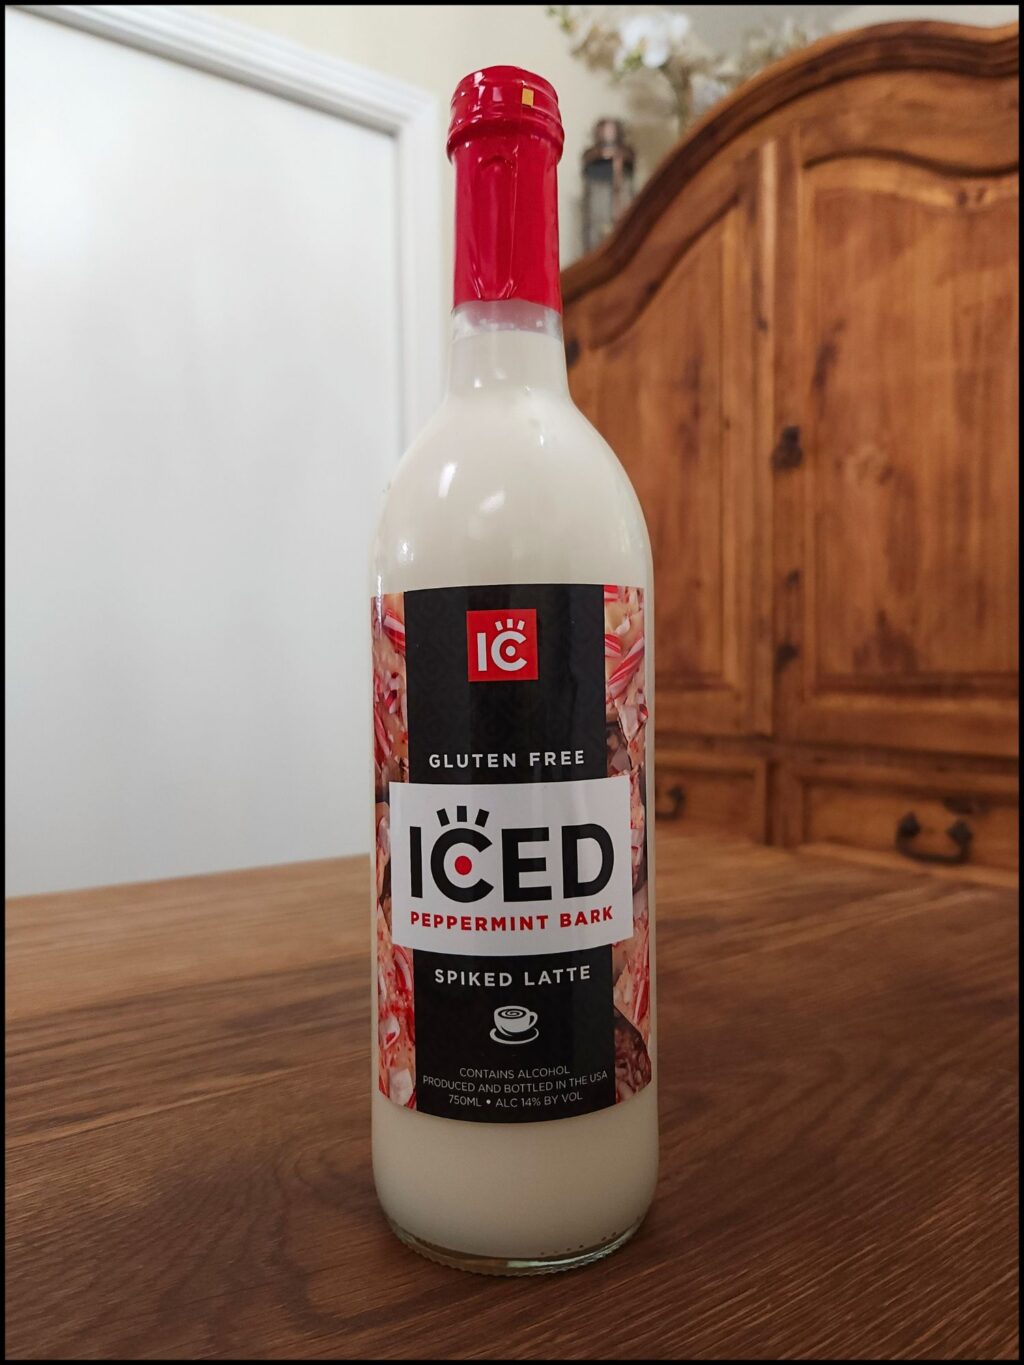 Bottle of IC Iced Peppermint Bark Spiked Latte sitting on a wooden table, in front of a mixed white and wooden background